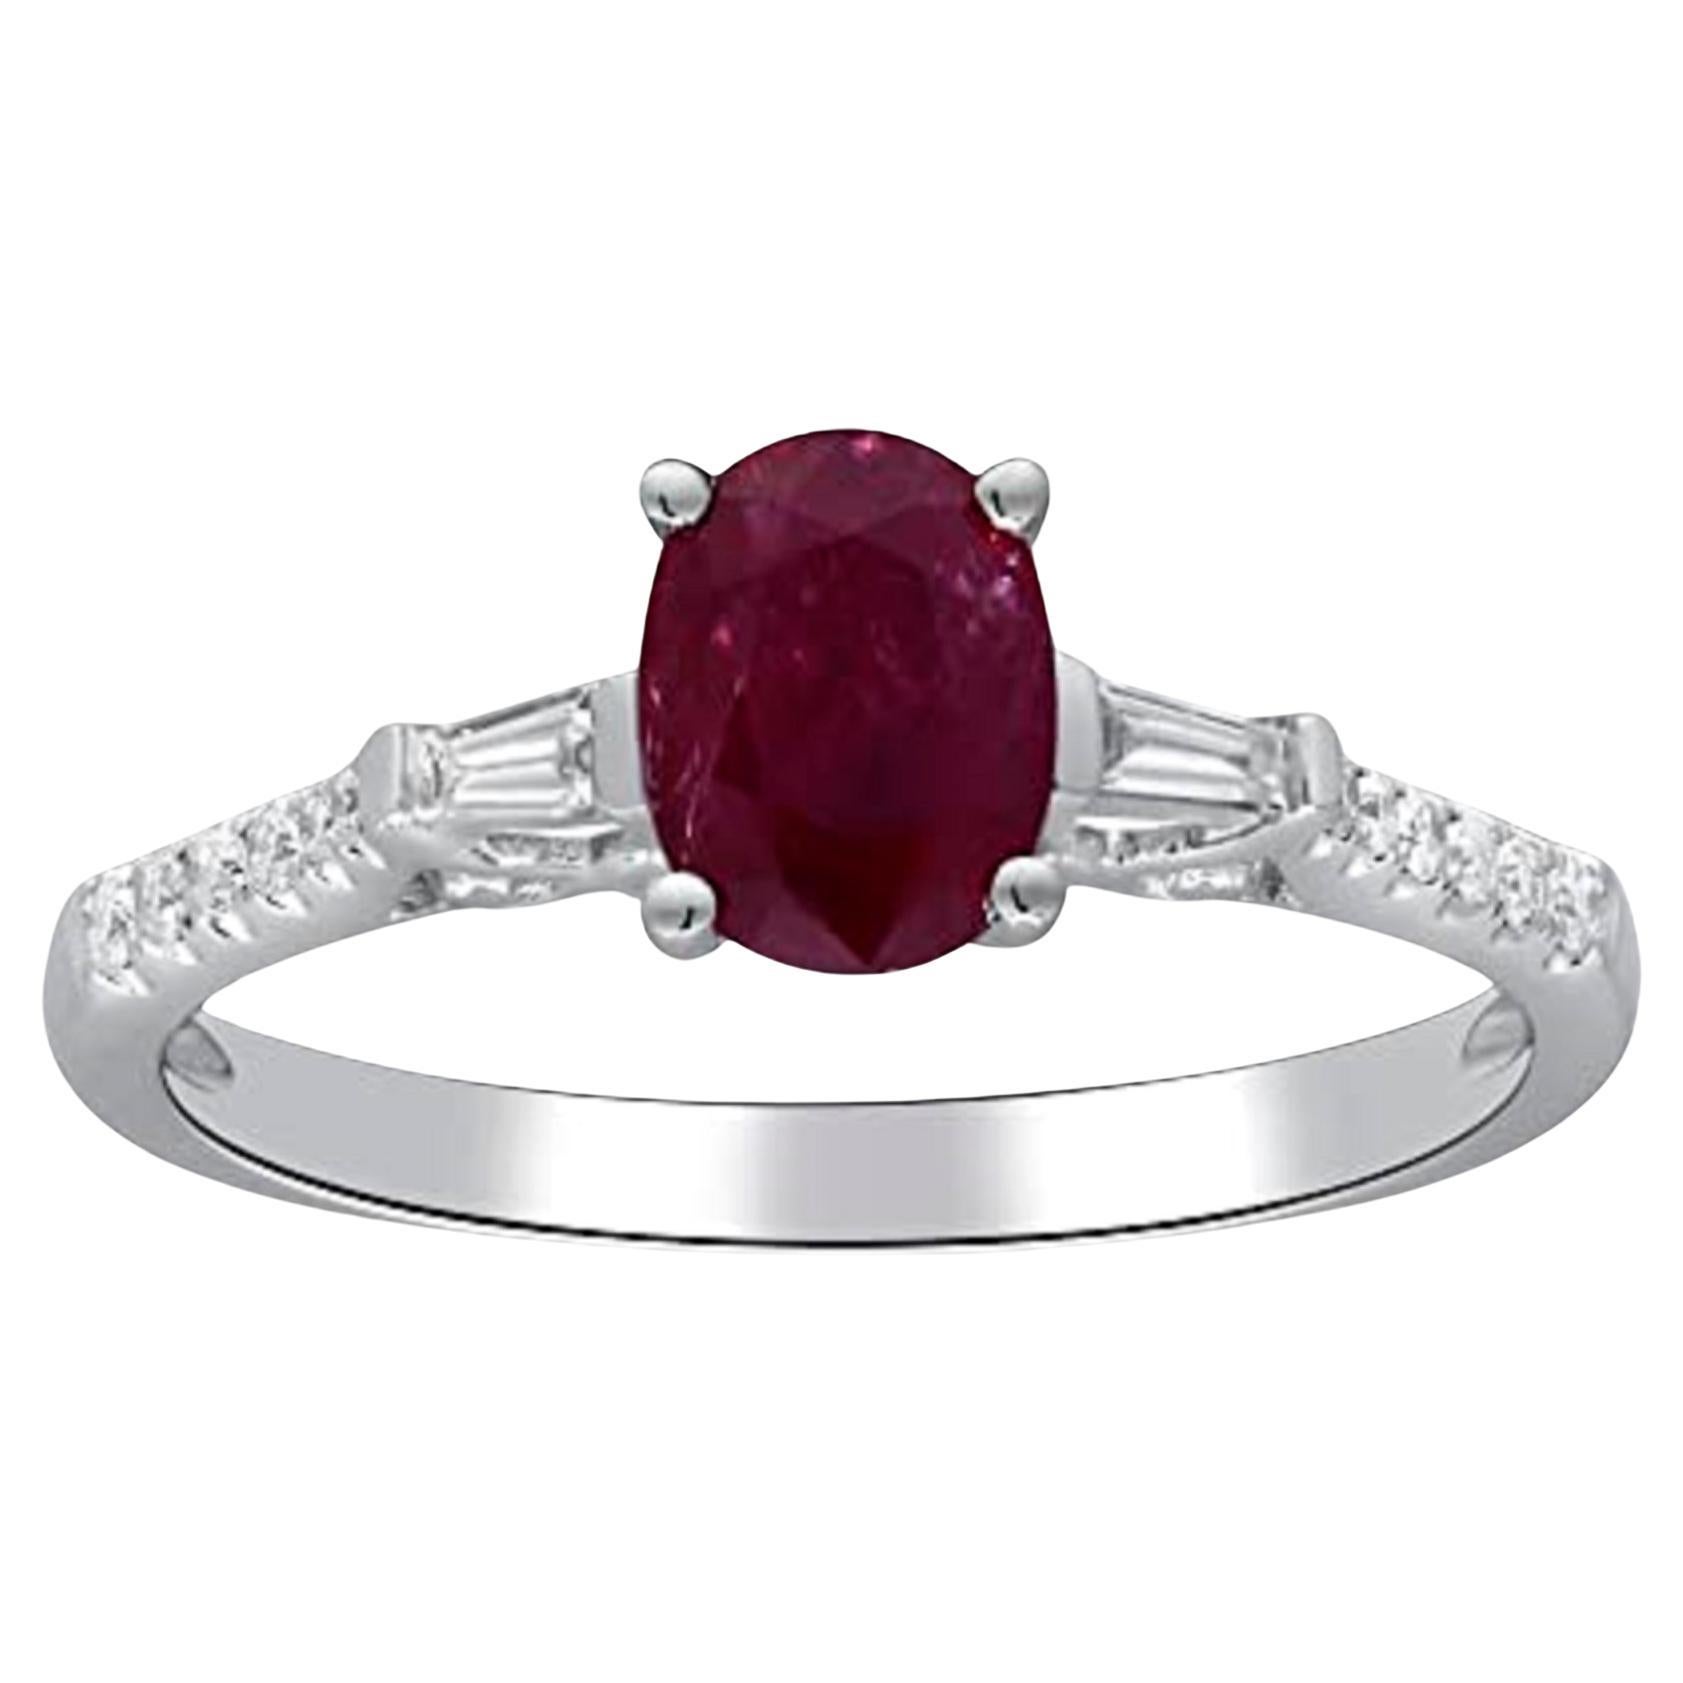 Gin & Grace 14K White Gold Mozambique Genuine Ruby Ring with Diamonds for women